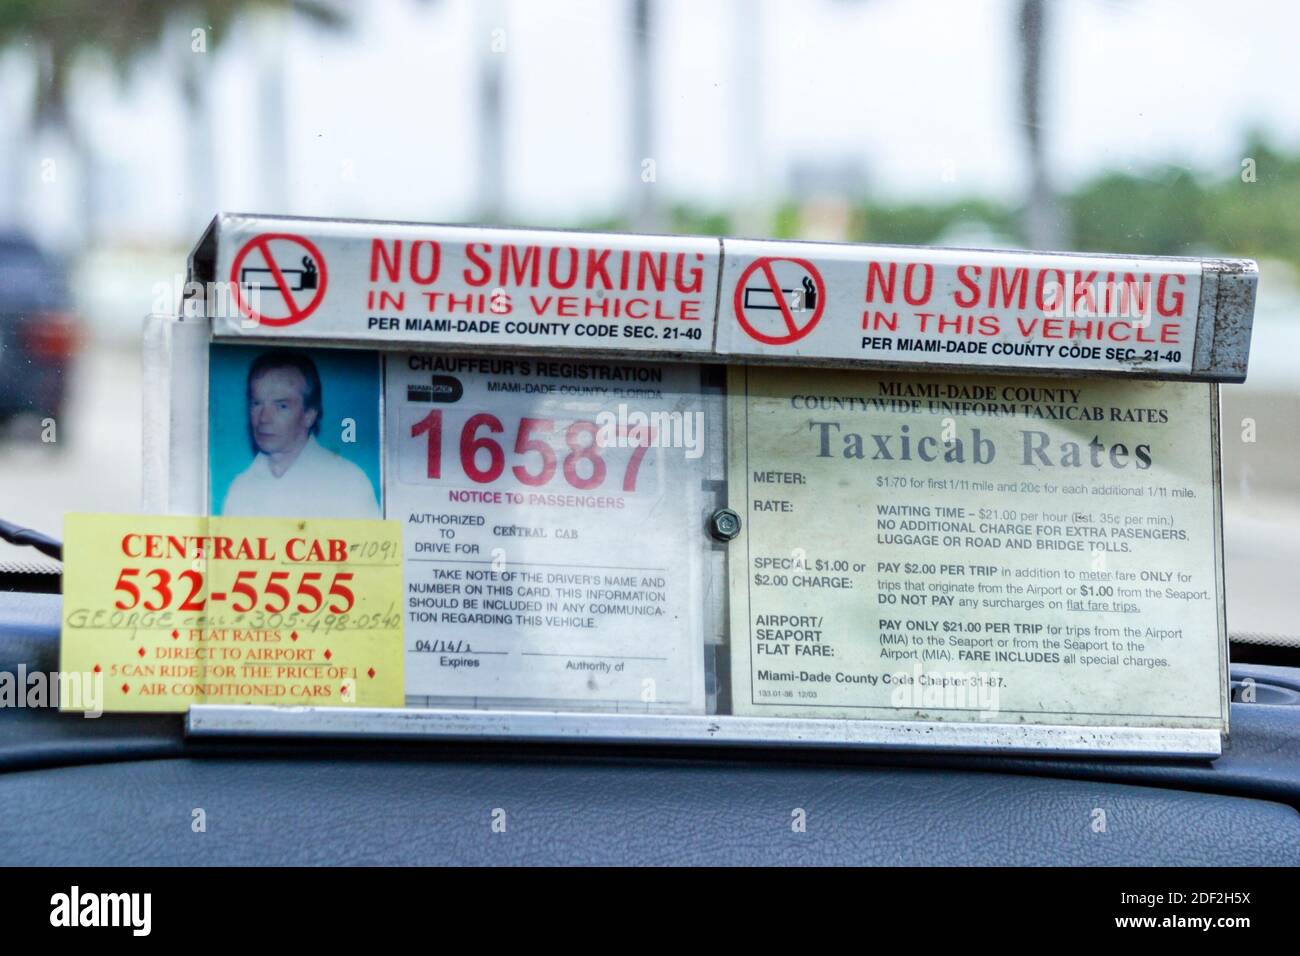 Miami Beach Florida,taxi taxis cab cabs taxicab,driver driver's license identification, Stock Photo